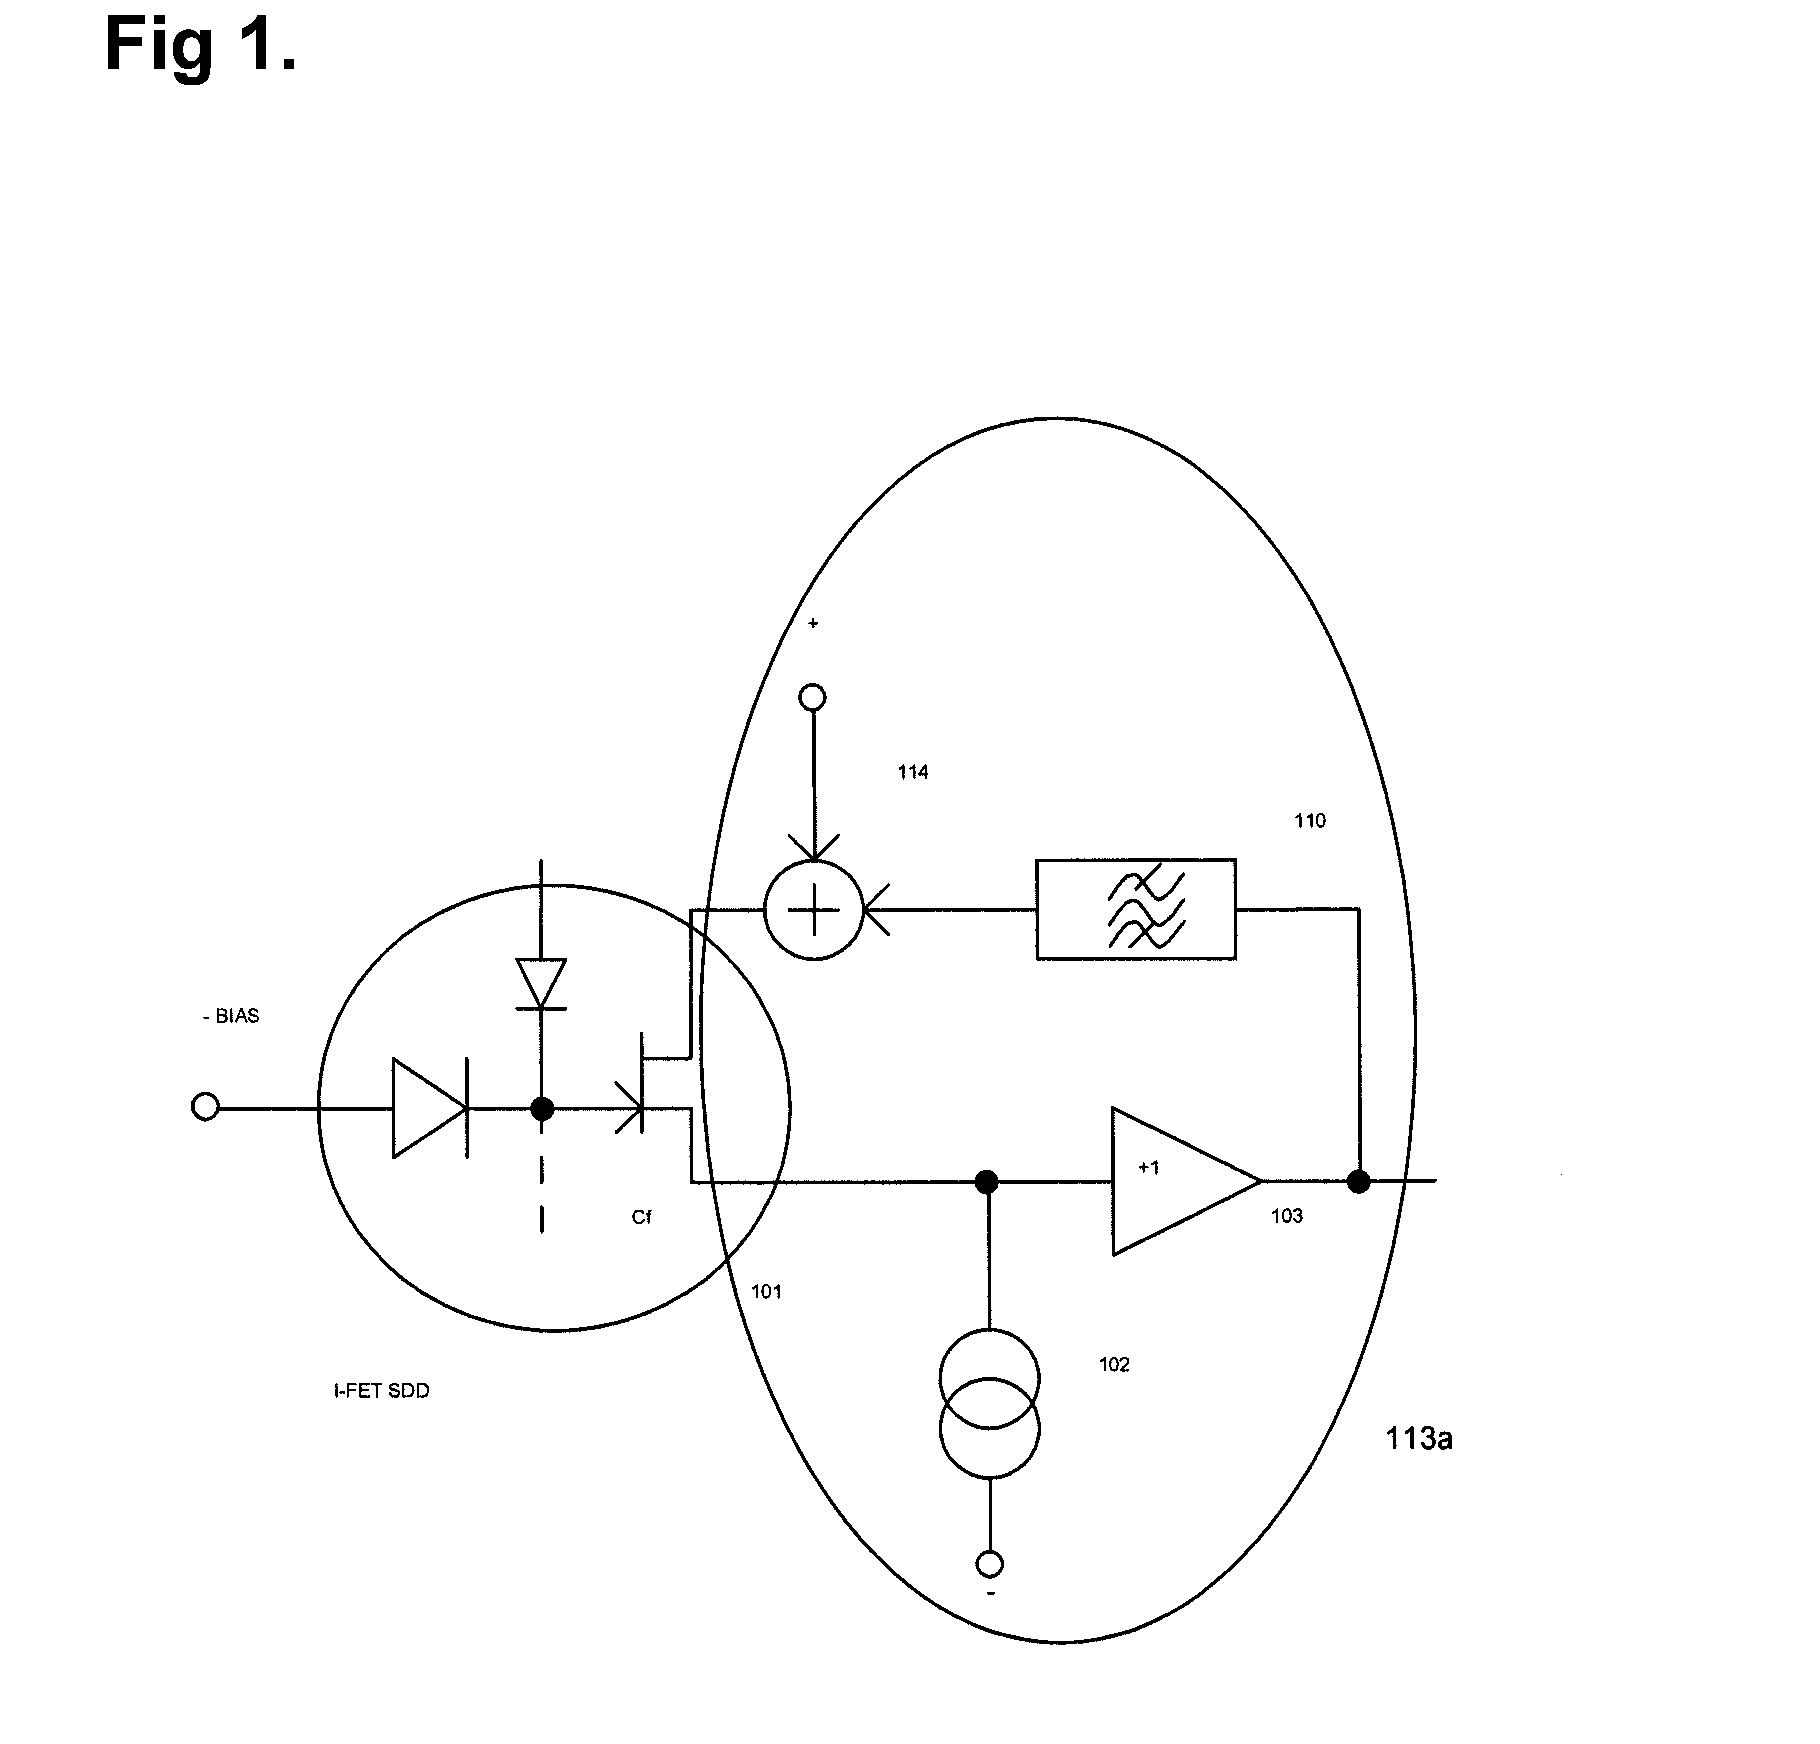 Energy Dispersive X-Ray I-FET SDD Detector Appliance and a Method for Pulsed Reset Neutralization of Accumulated Charges Within an Energy Dispersive X-Ray I-FET SDD Detector Appliance